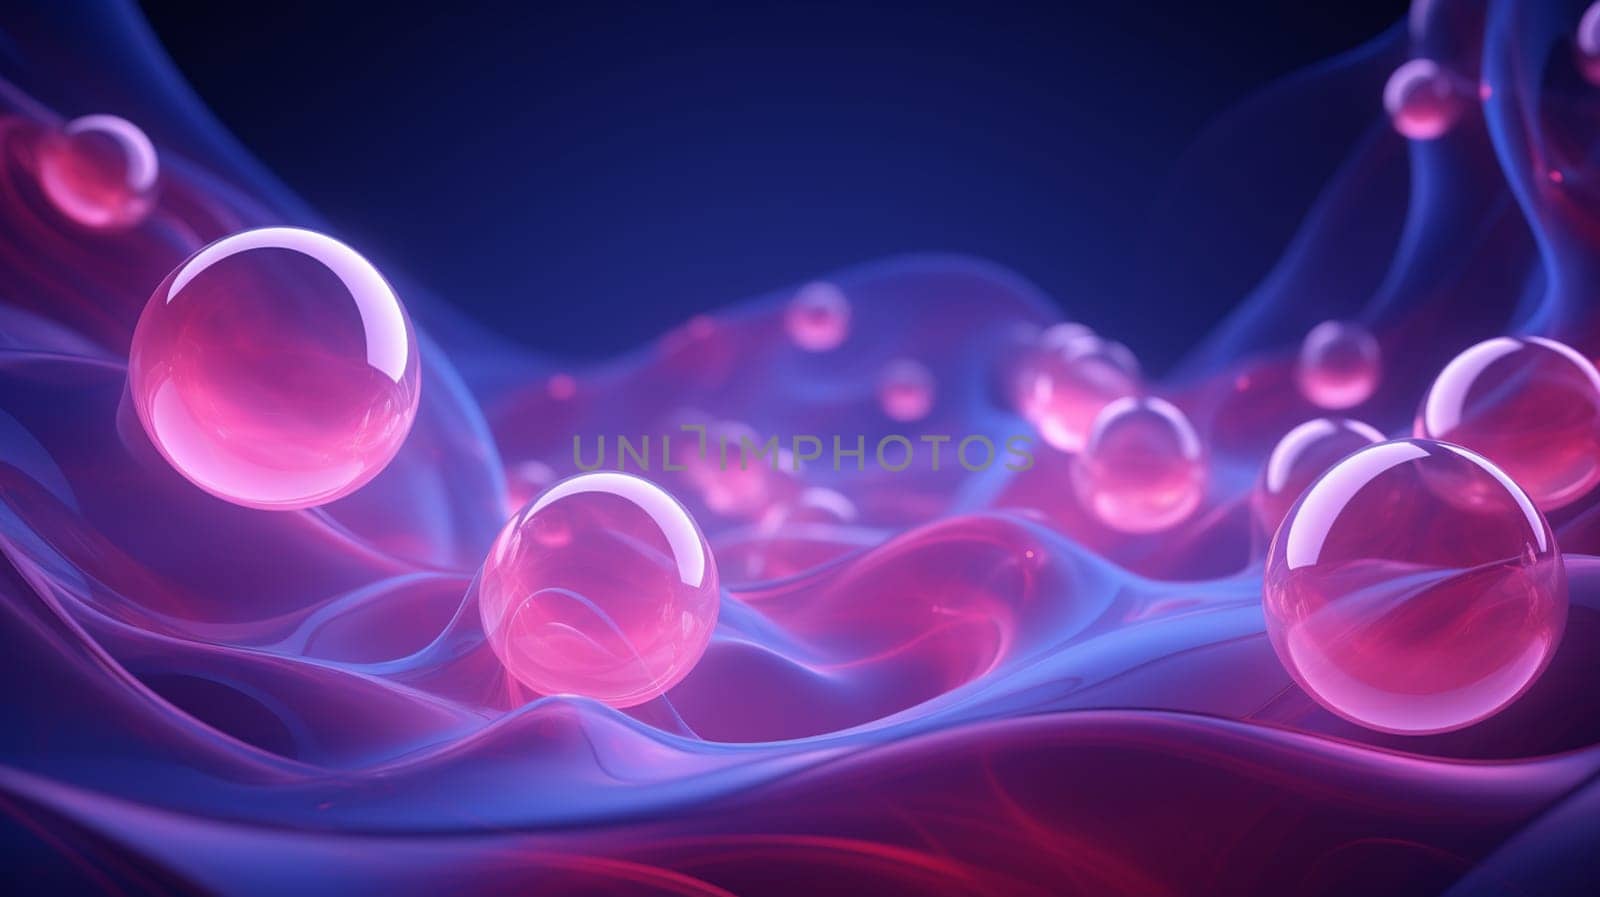 water drops on glass with blue background, close-up . High quality photo